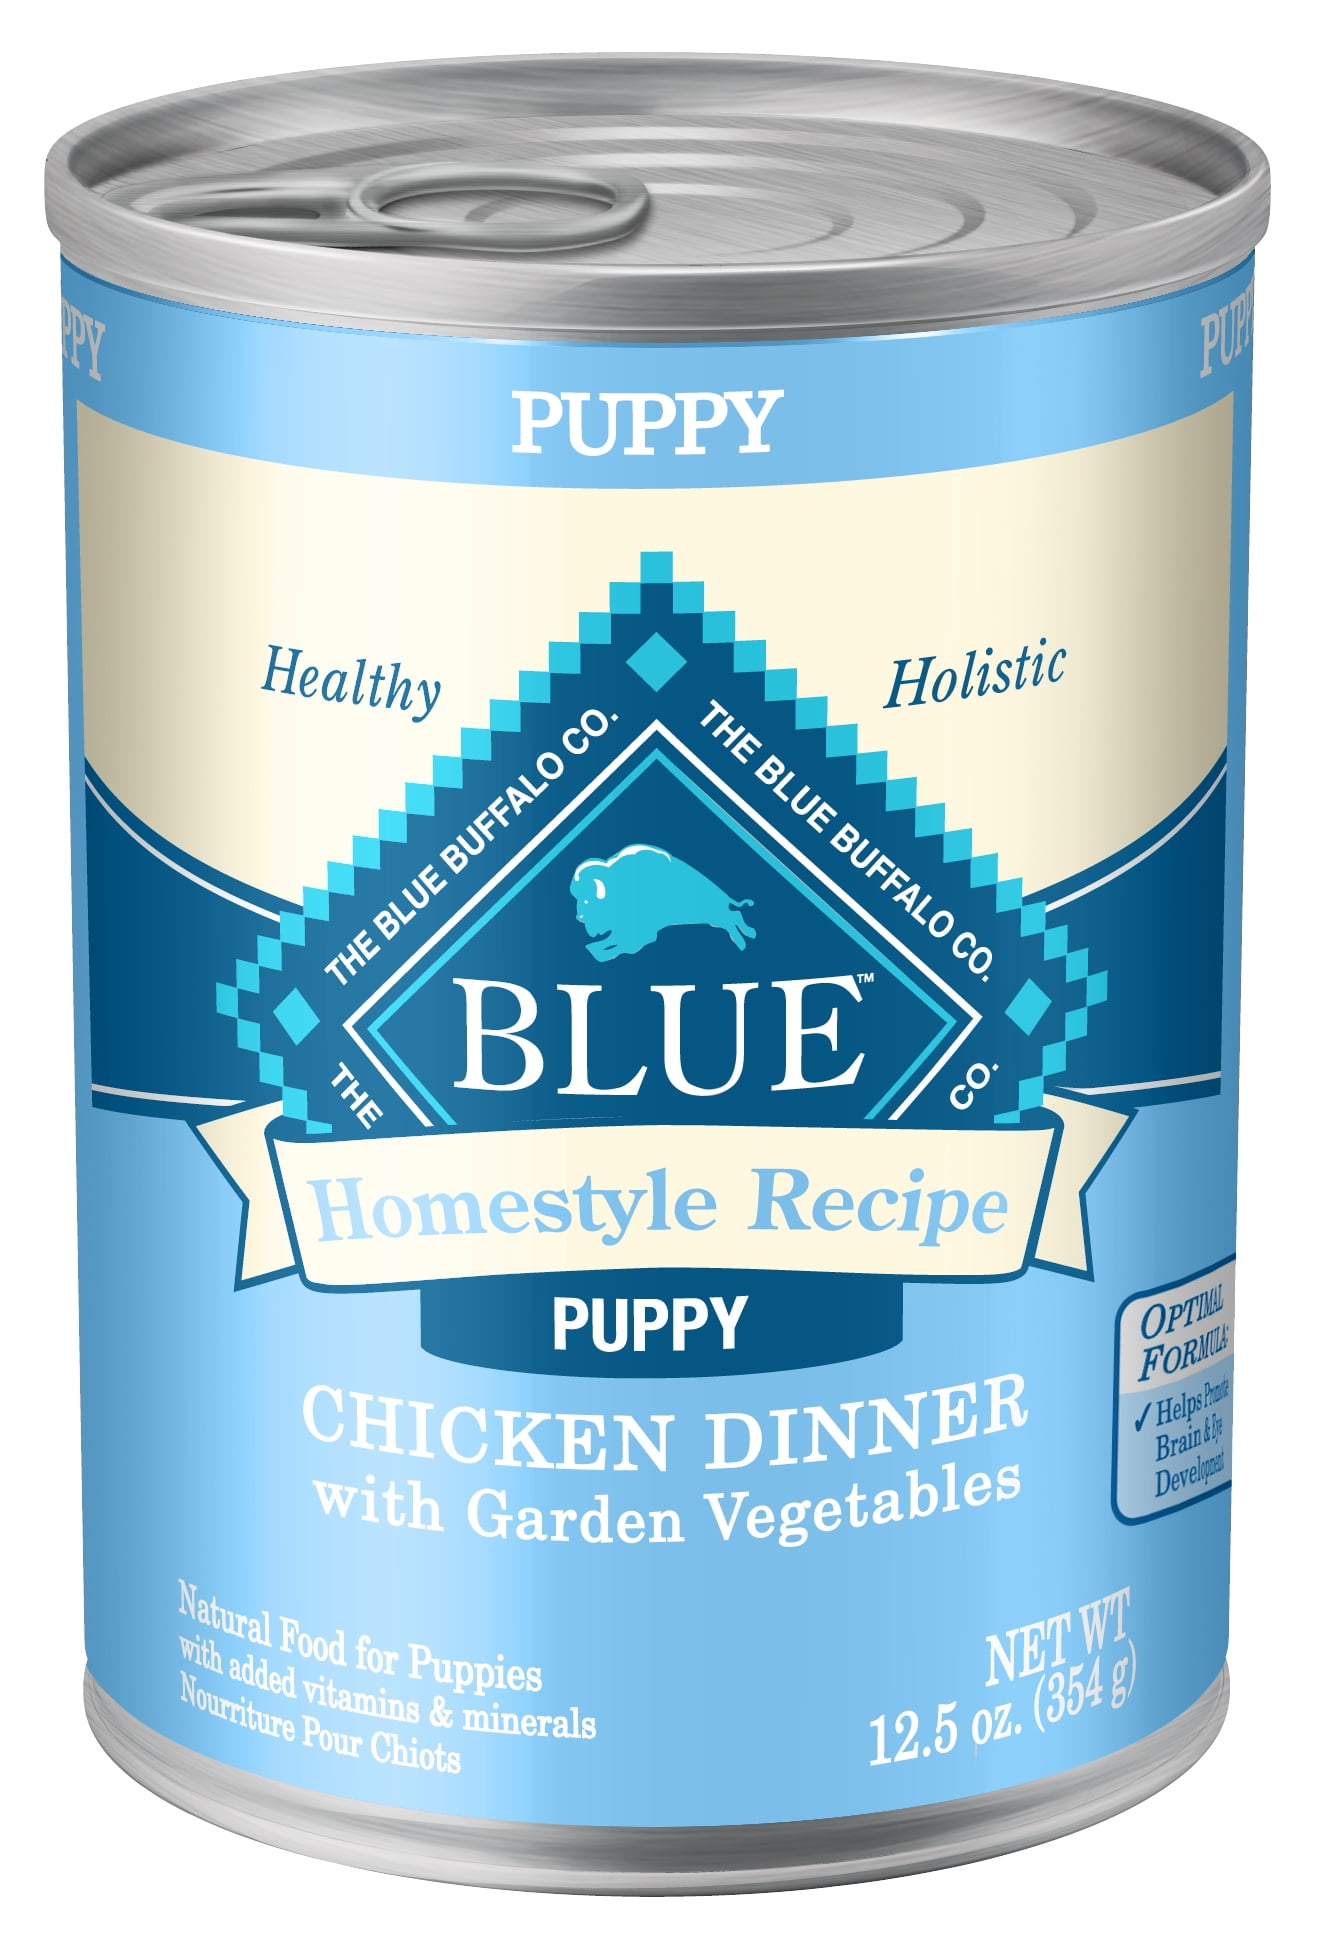 Blue Buffalo Homestyle Recipe Natural Puppy Wet Dog Food, Chicken 12.5oz can (Pack of 12